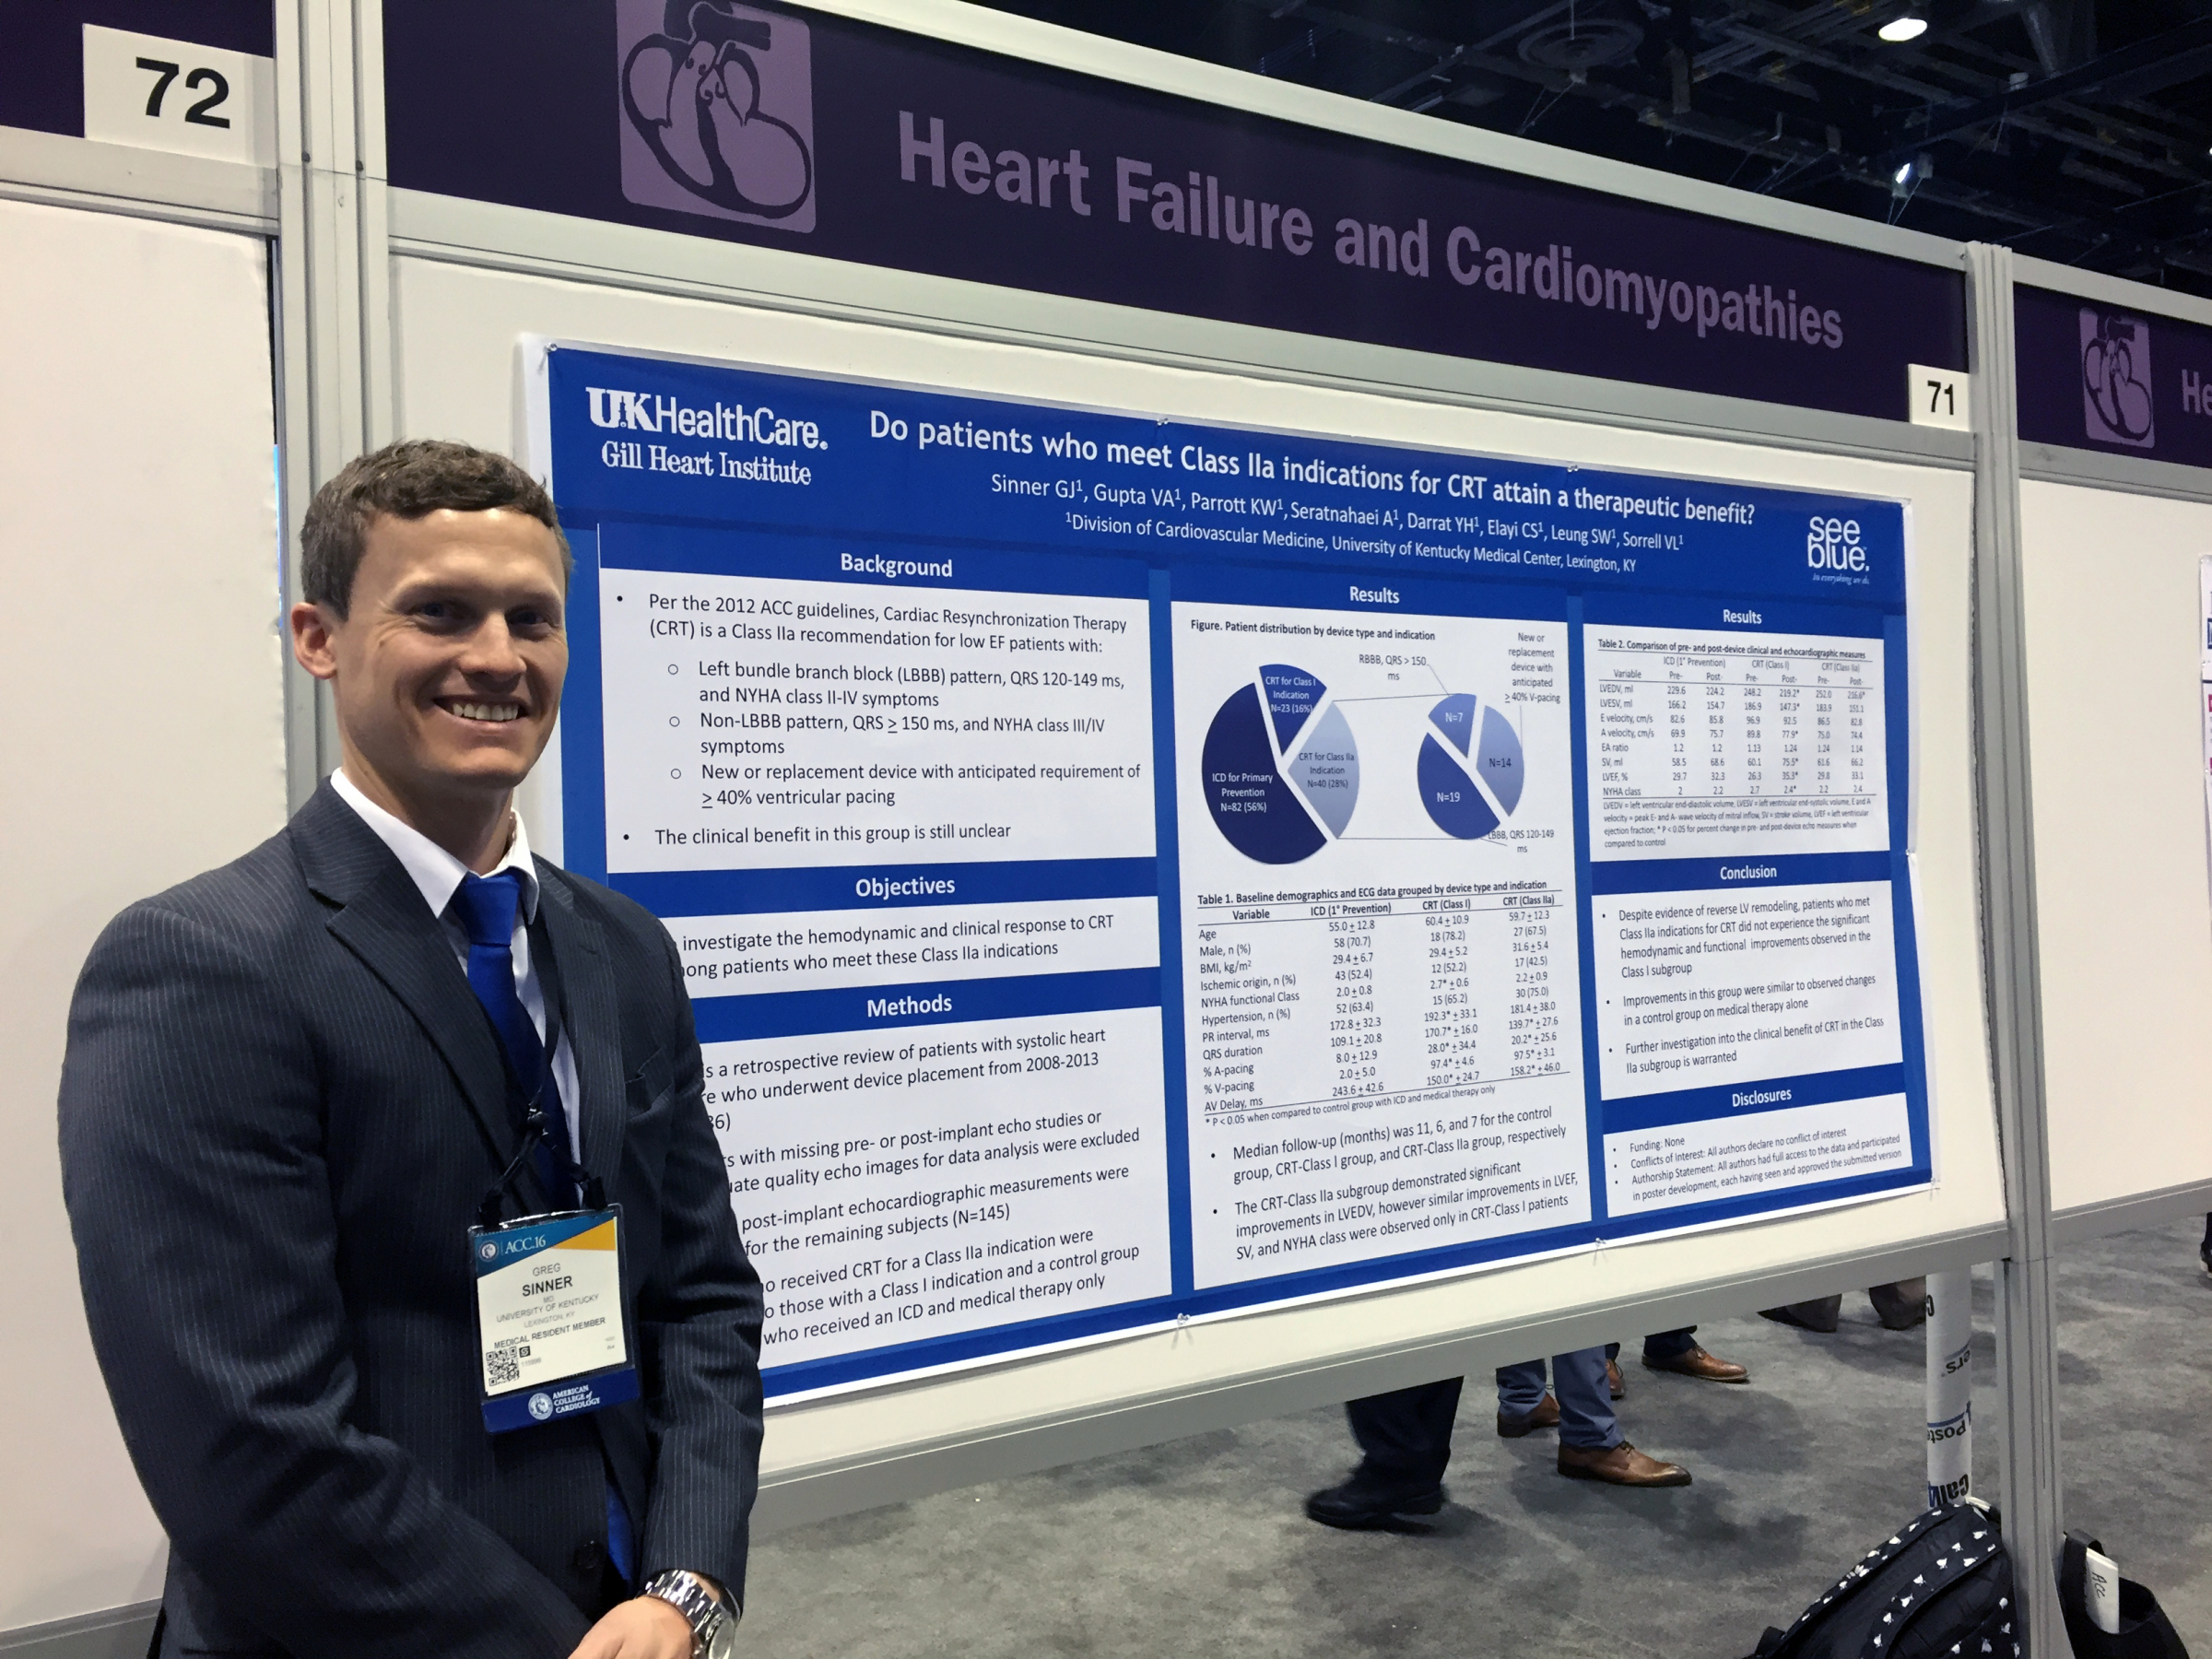 Fellow Greg Sinner presenting a poster at a conference over 'Heart Failure and Cardiomyopathies'